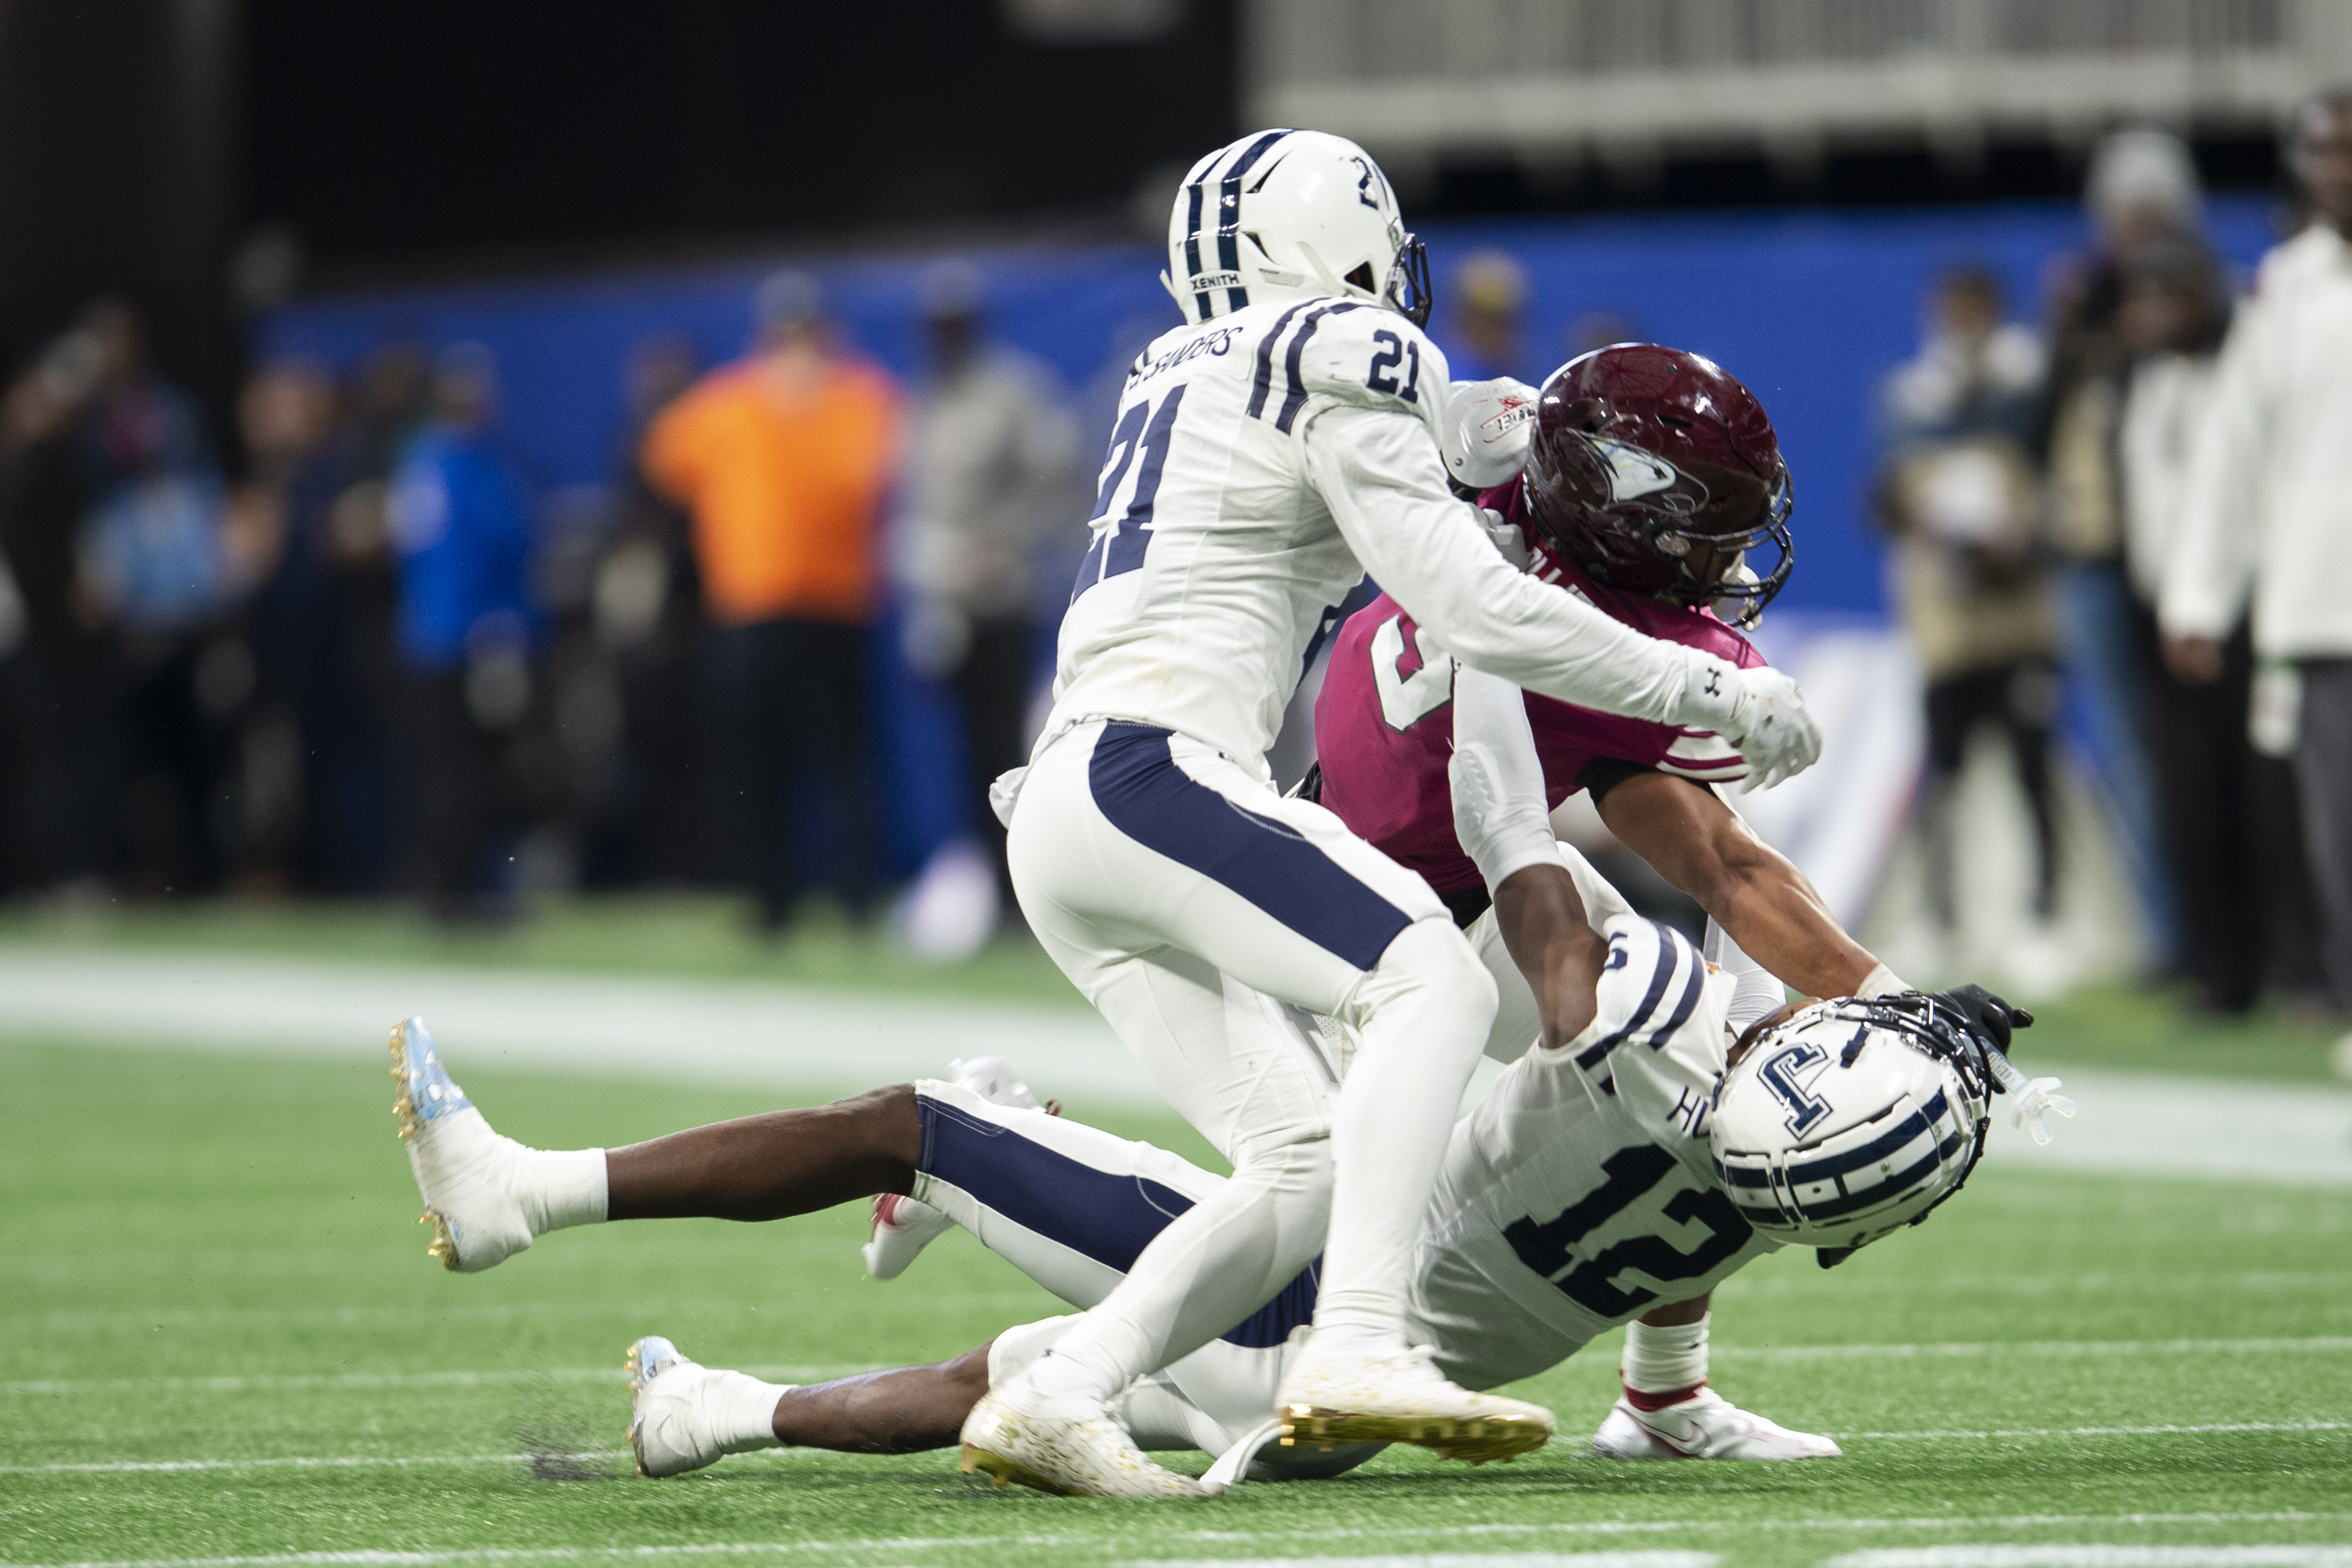 NC Central beats Jackson State in Deion Sanders' final game